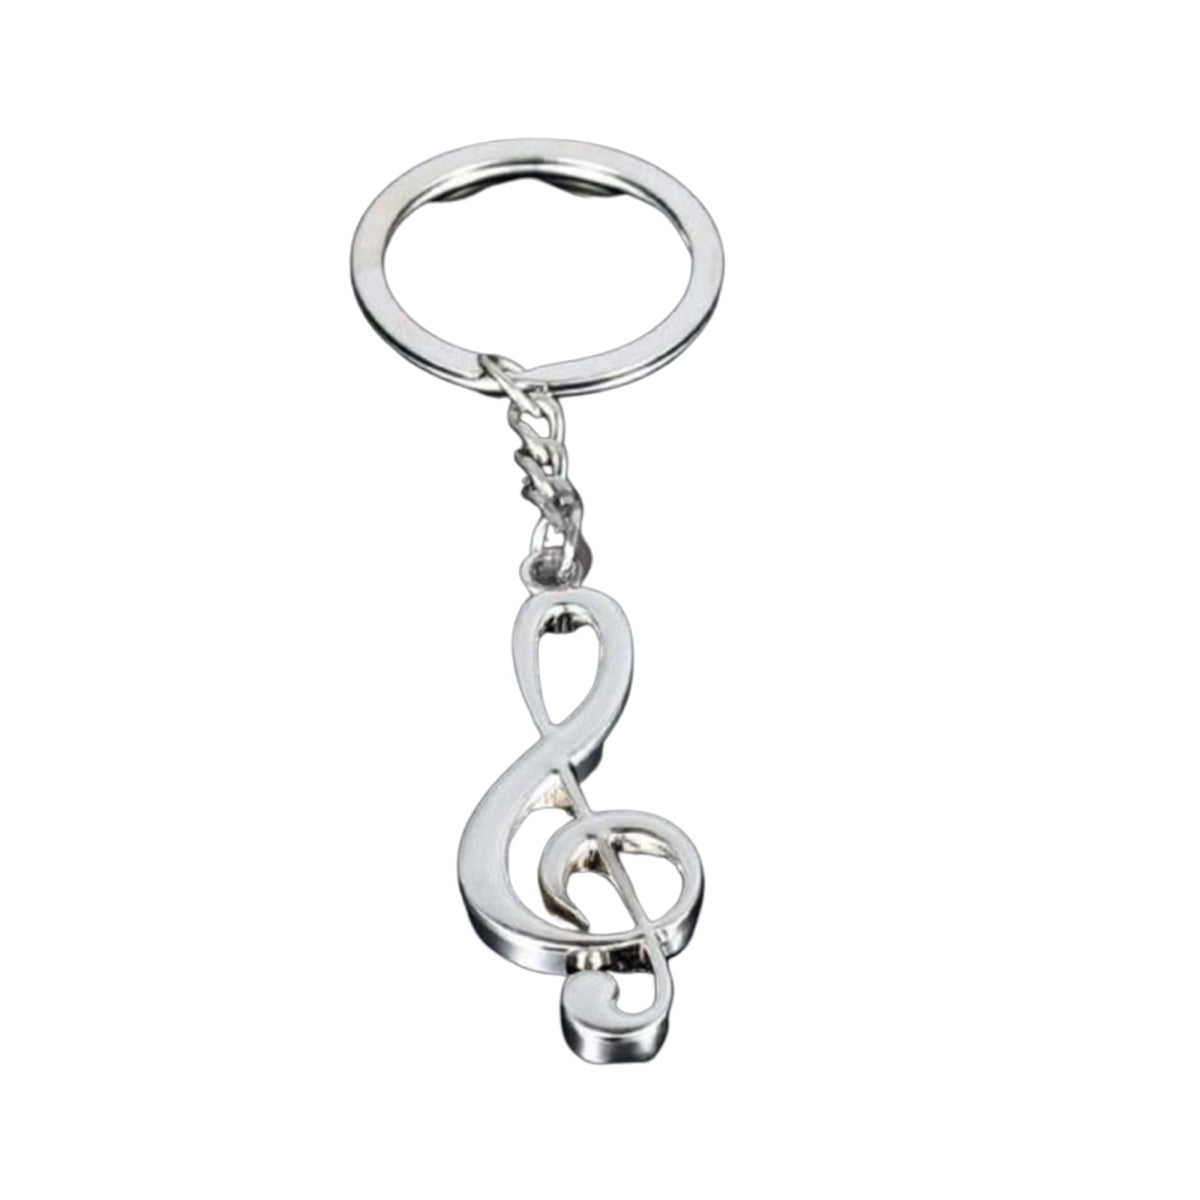 Treble Clef Musical Note Key Chain Ring Silver Colour Plated Keychain Music Symbol Keyring Rings